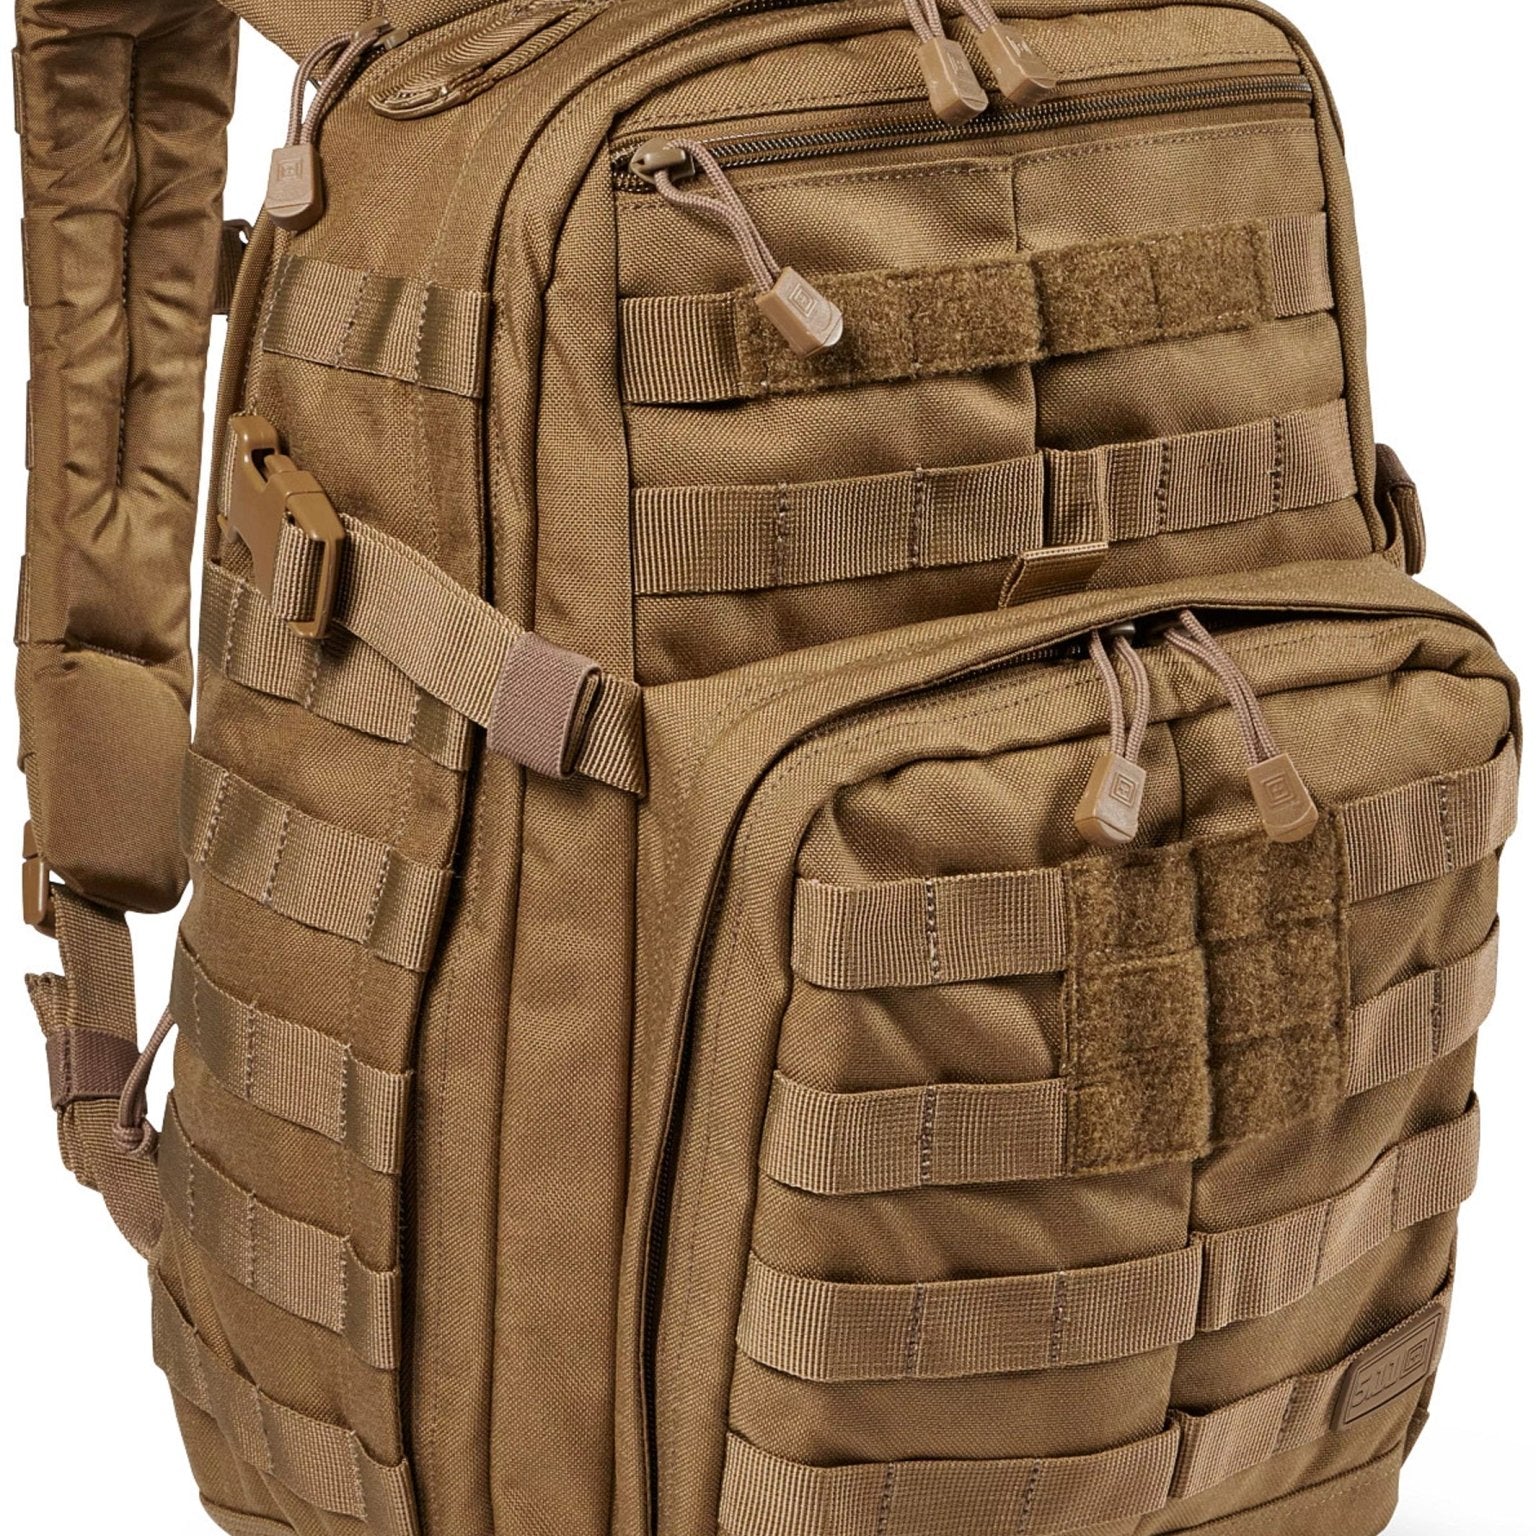 4elementsclothing5.11 Tactical5.11 Tactical - 5.11 Tactical Rush 12 2.0 Backpack with Laptop compartment - Style 56561Bag56561-134